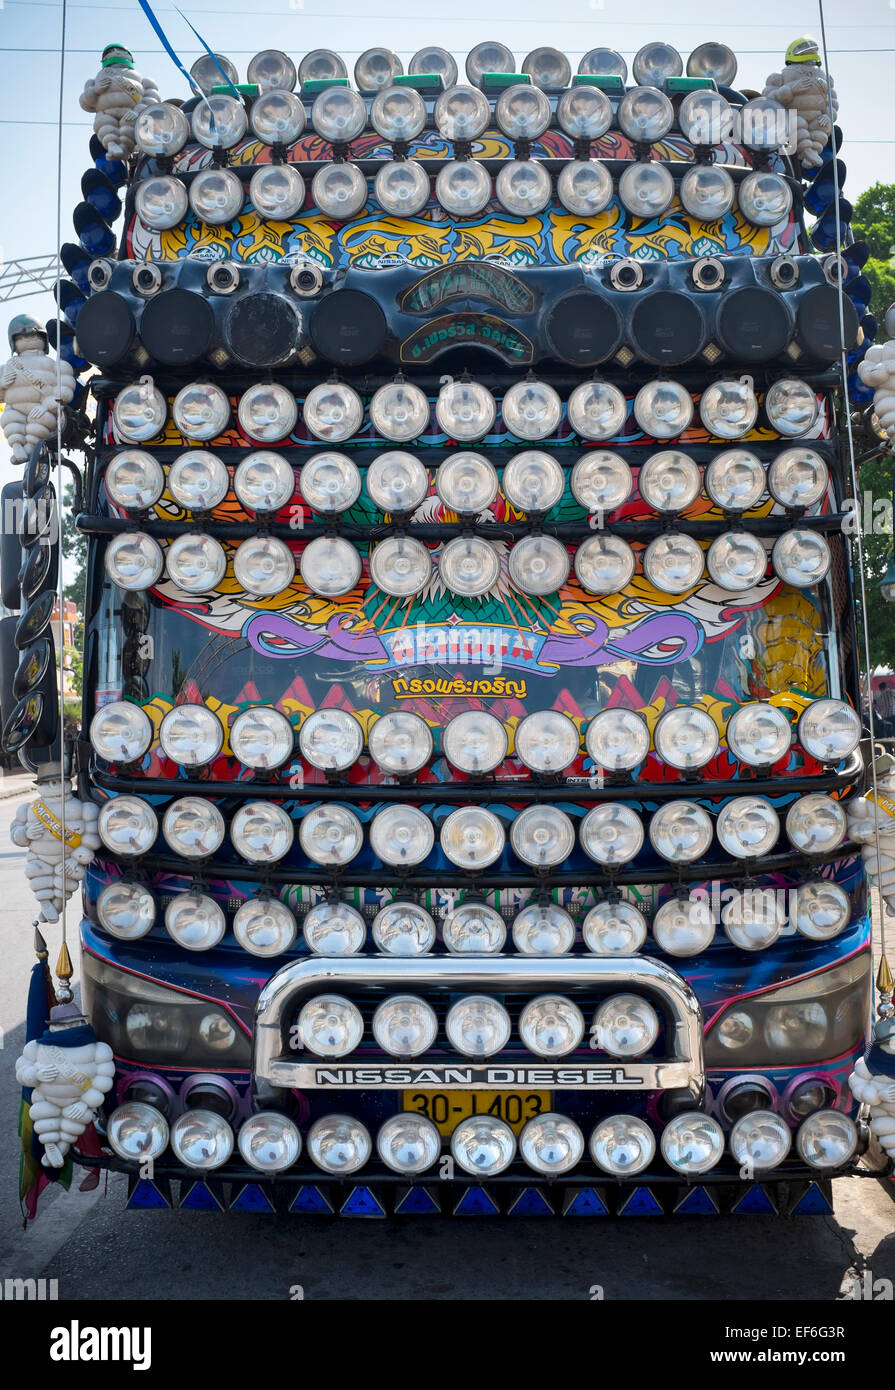 Super Coach covered with Headlights in Thailand Stock Photo